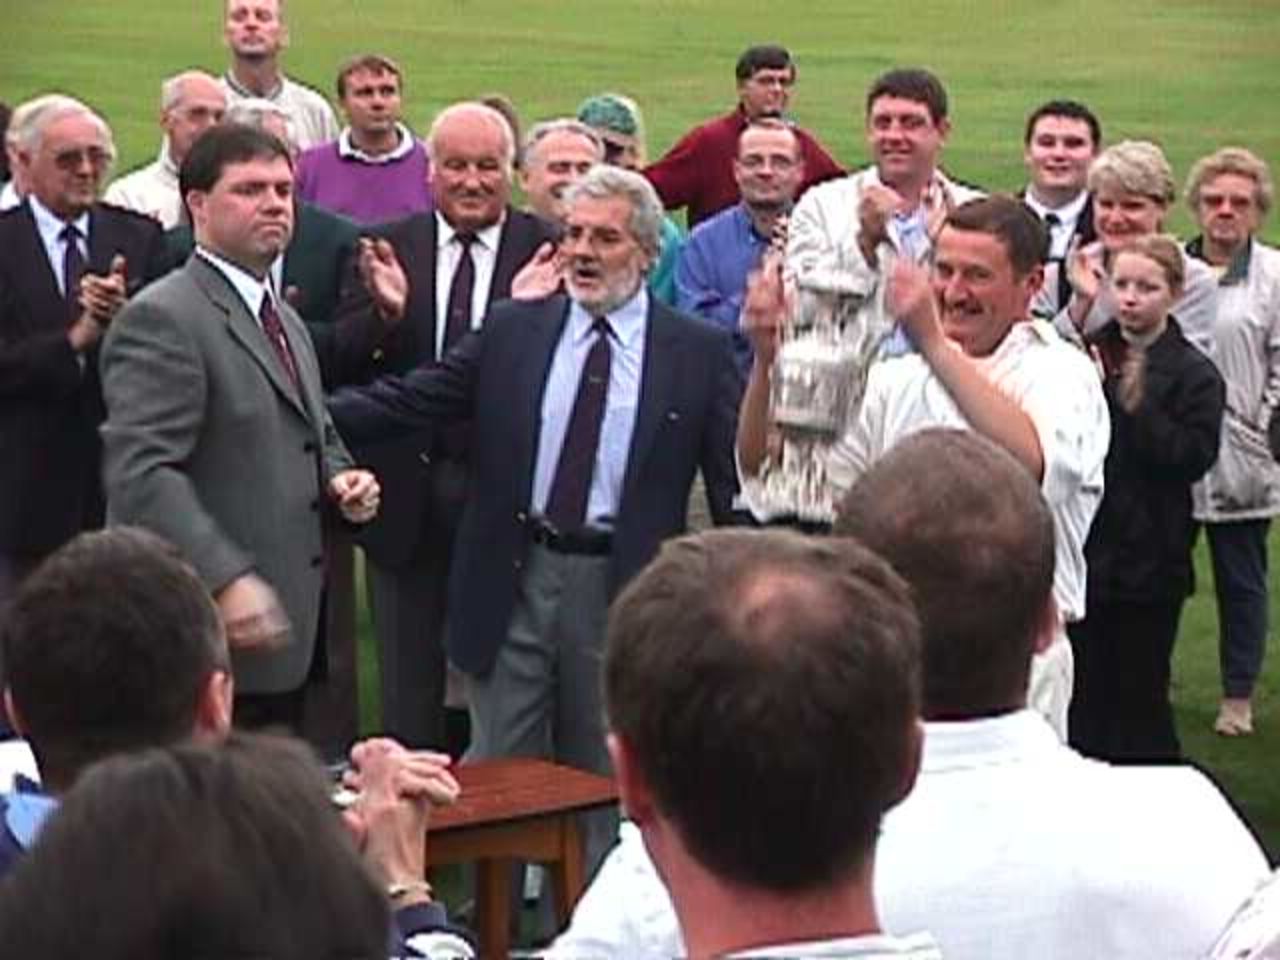 Neil Wilkinson becomes the first Bacup captain in 40 years to get his hands on the Lancashire League Championship trophy